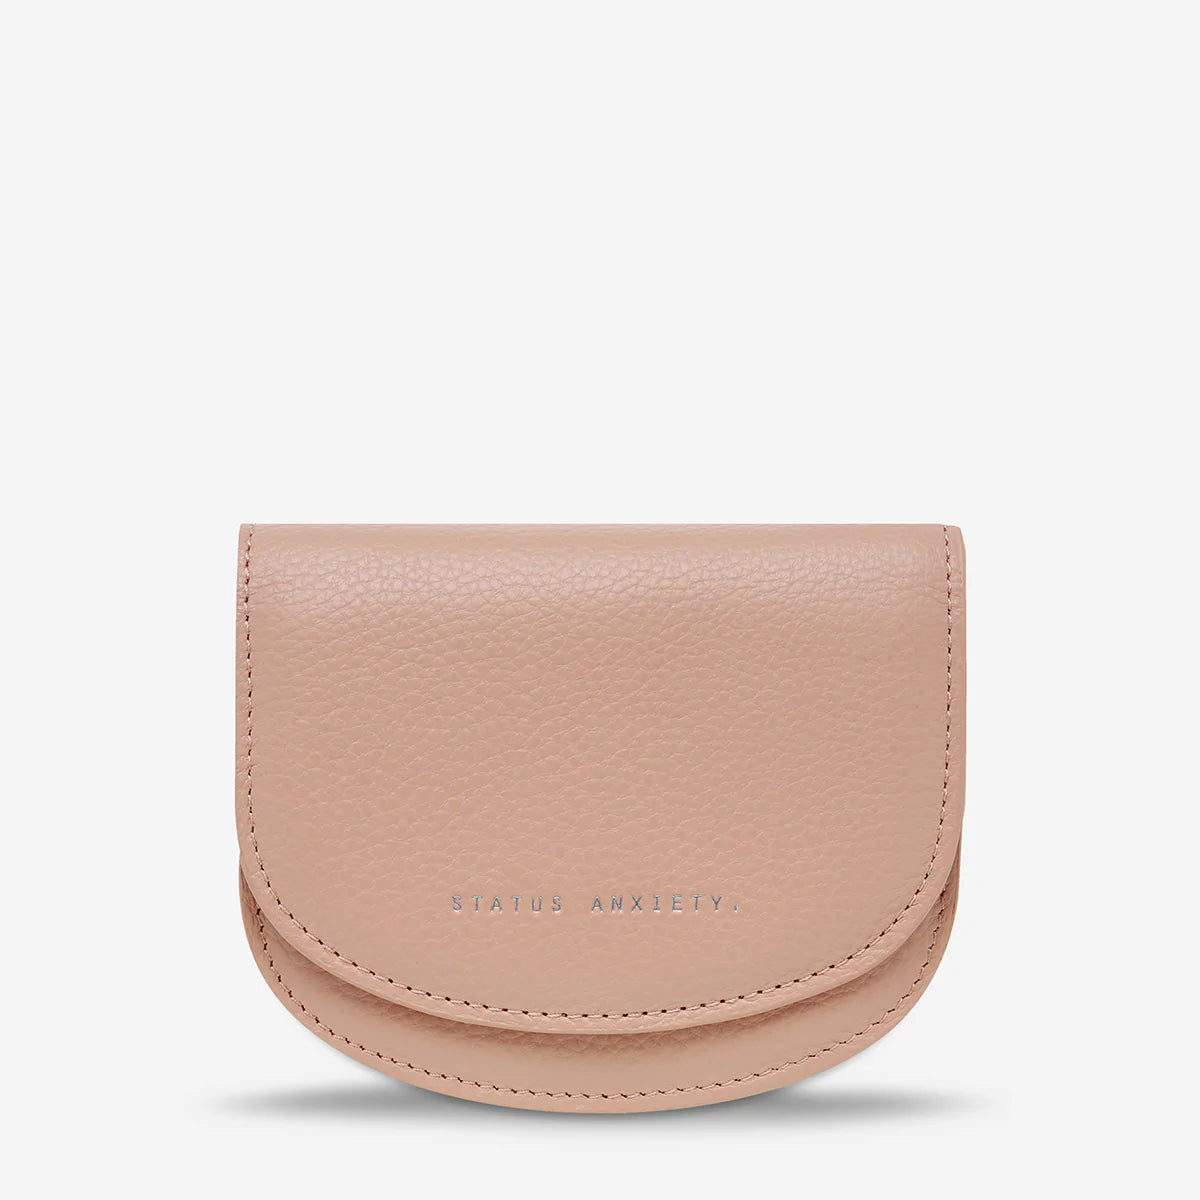 Status Anxiety Us For Now wallet - Multiple Colours